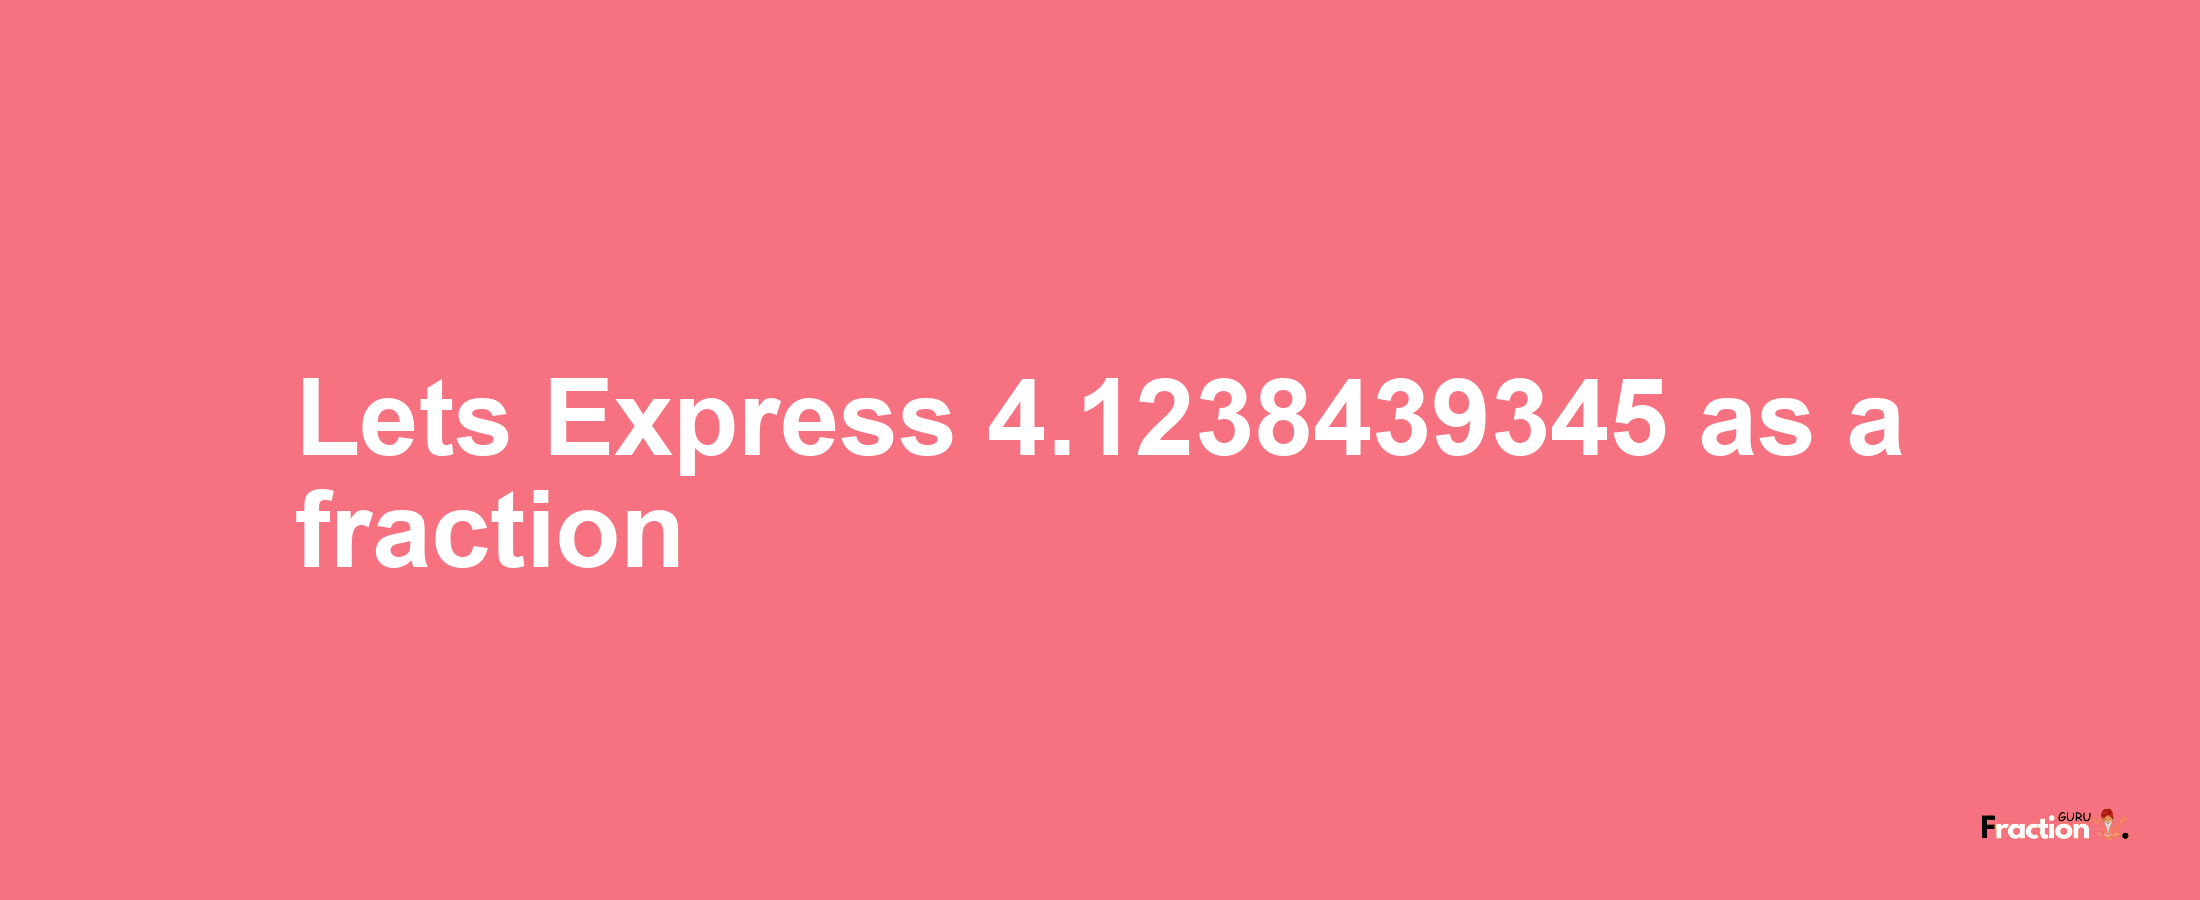 Lets Express 4.1238439345 as afraction